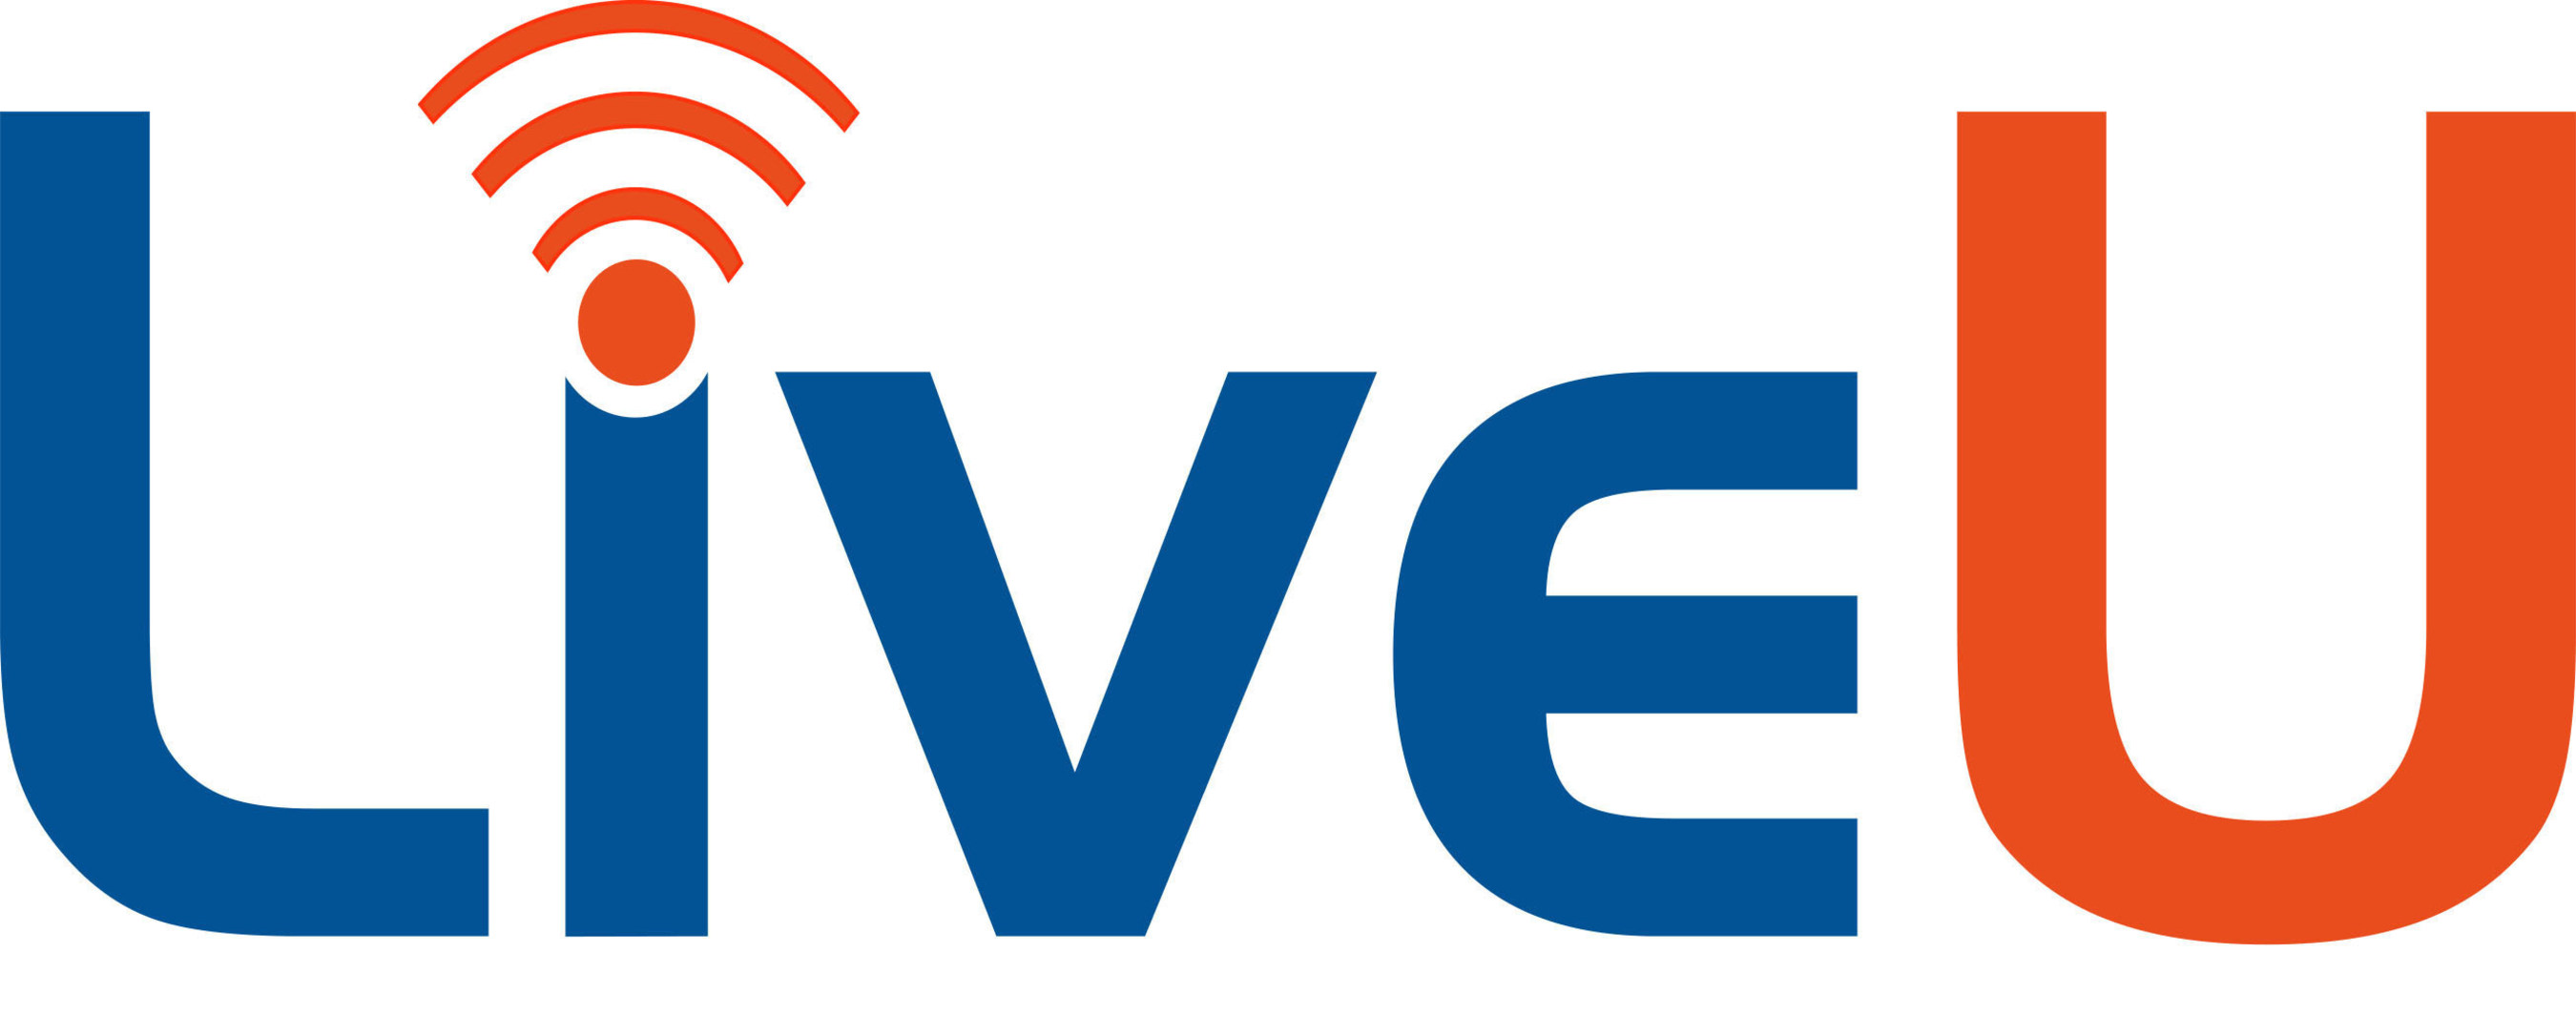 LiveU (http://liveu.tv/) is the pioneer and leader of IP-based video services and broadcast solutions for acquisition, management, and distribution.